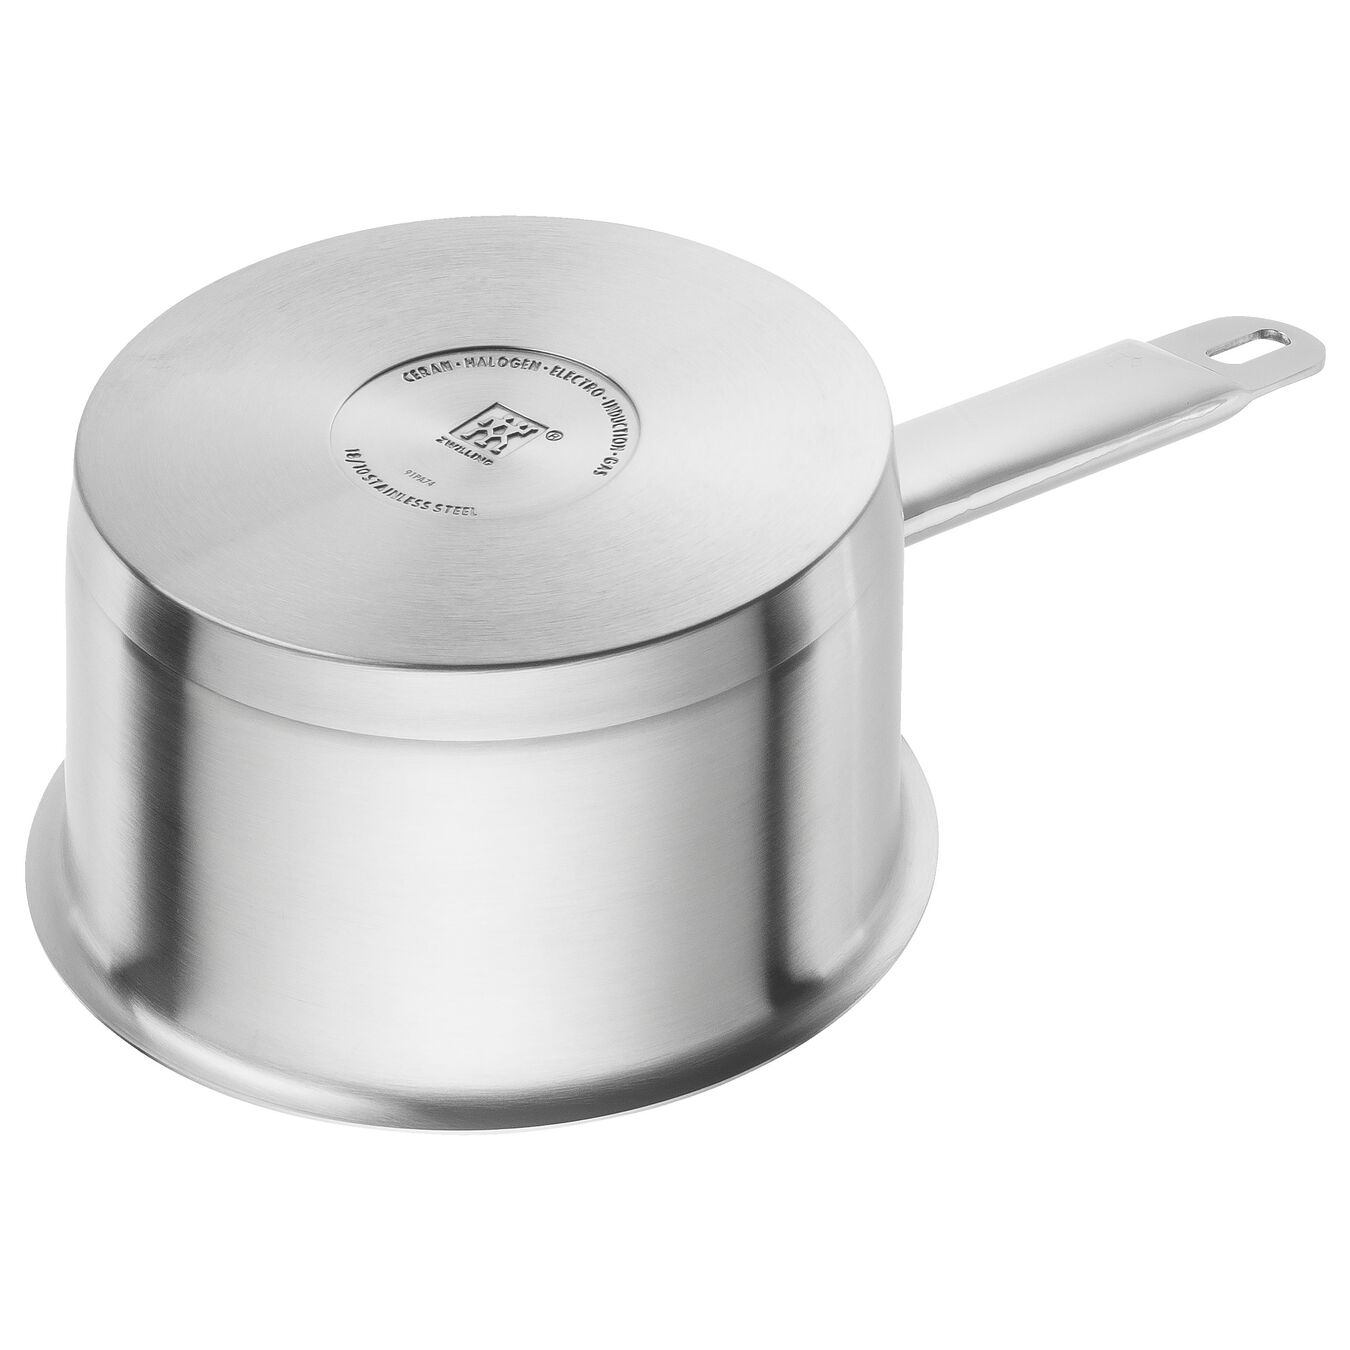 1.5 l 18/10 Stainless Steel round Sauce pan, silver,,large 3